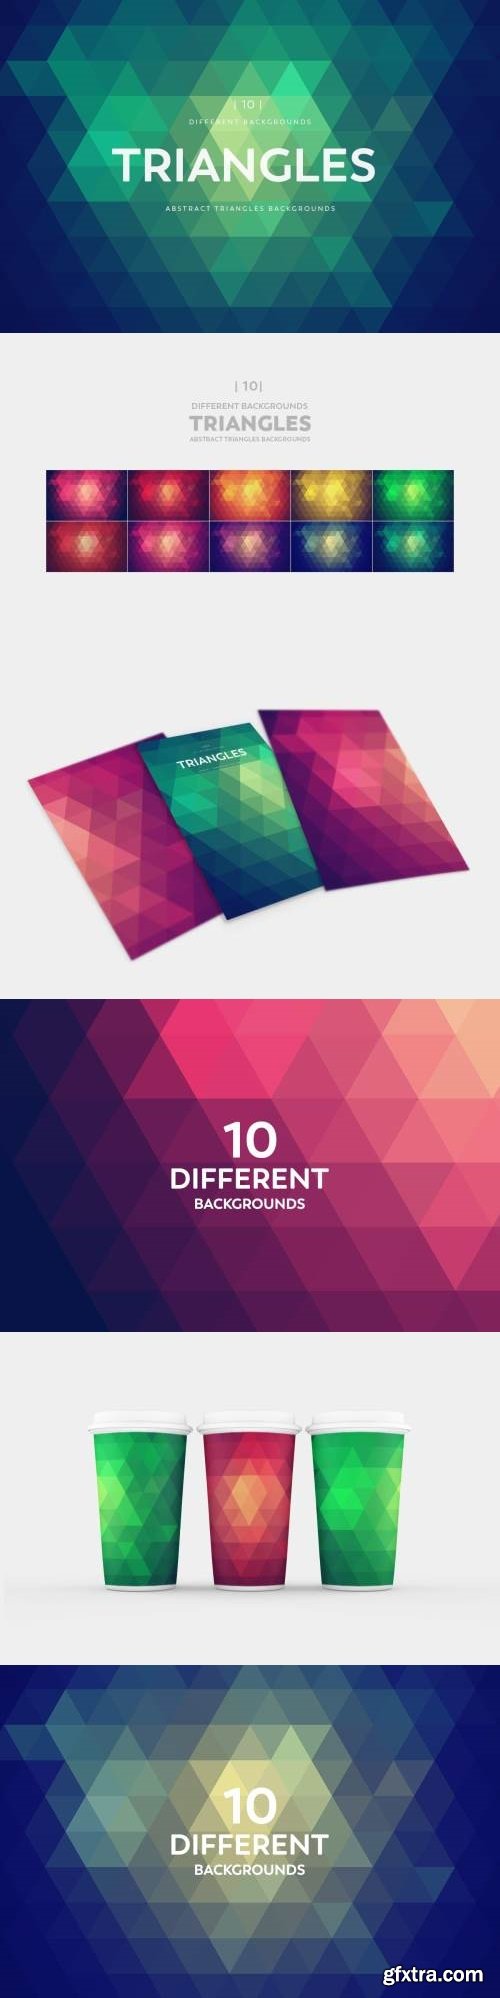 Abstract Triangles Backgrounds